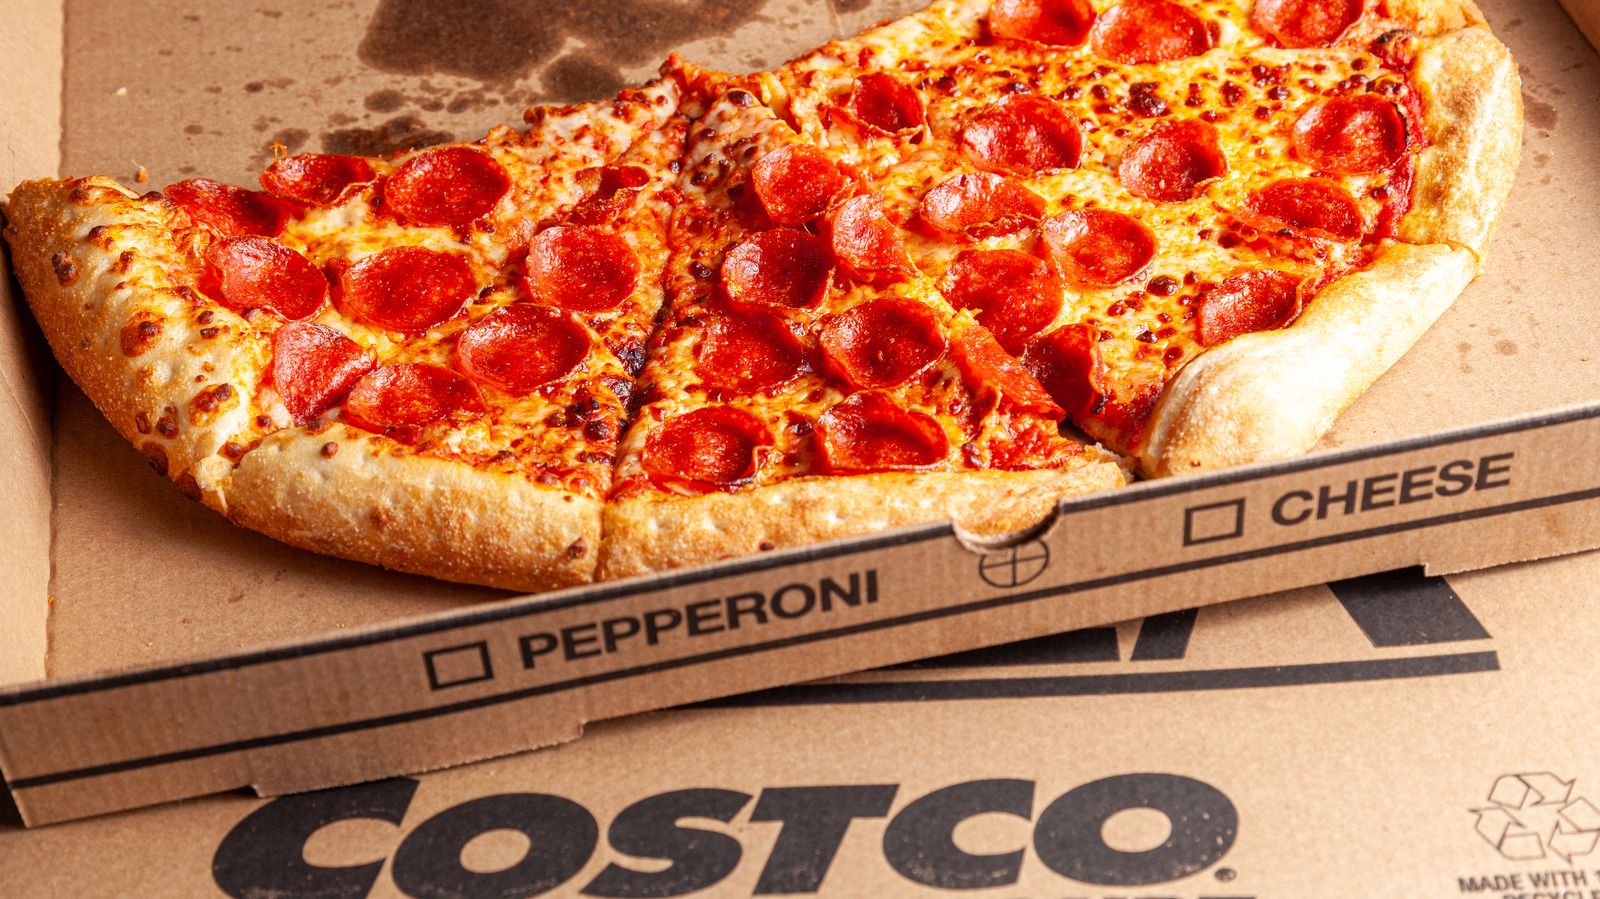 How Many Slices Are Typically In A Costco Pizza?